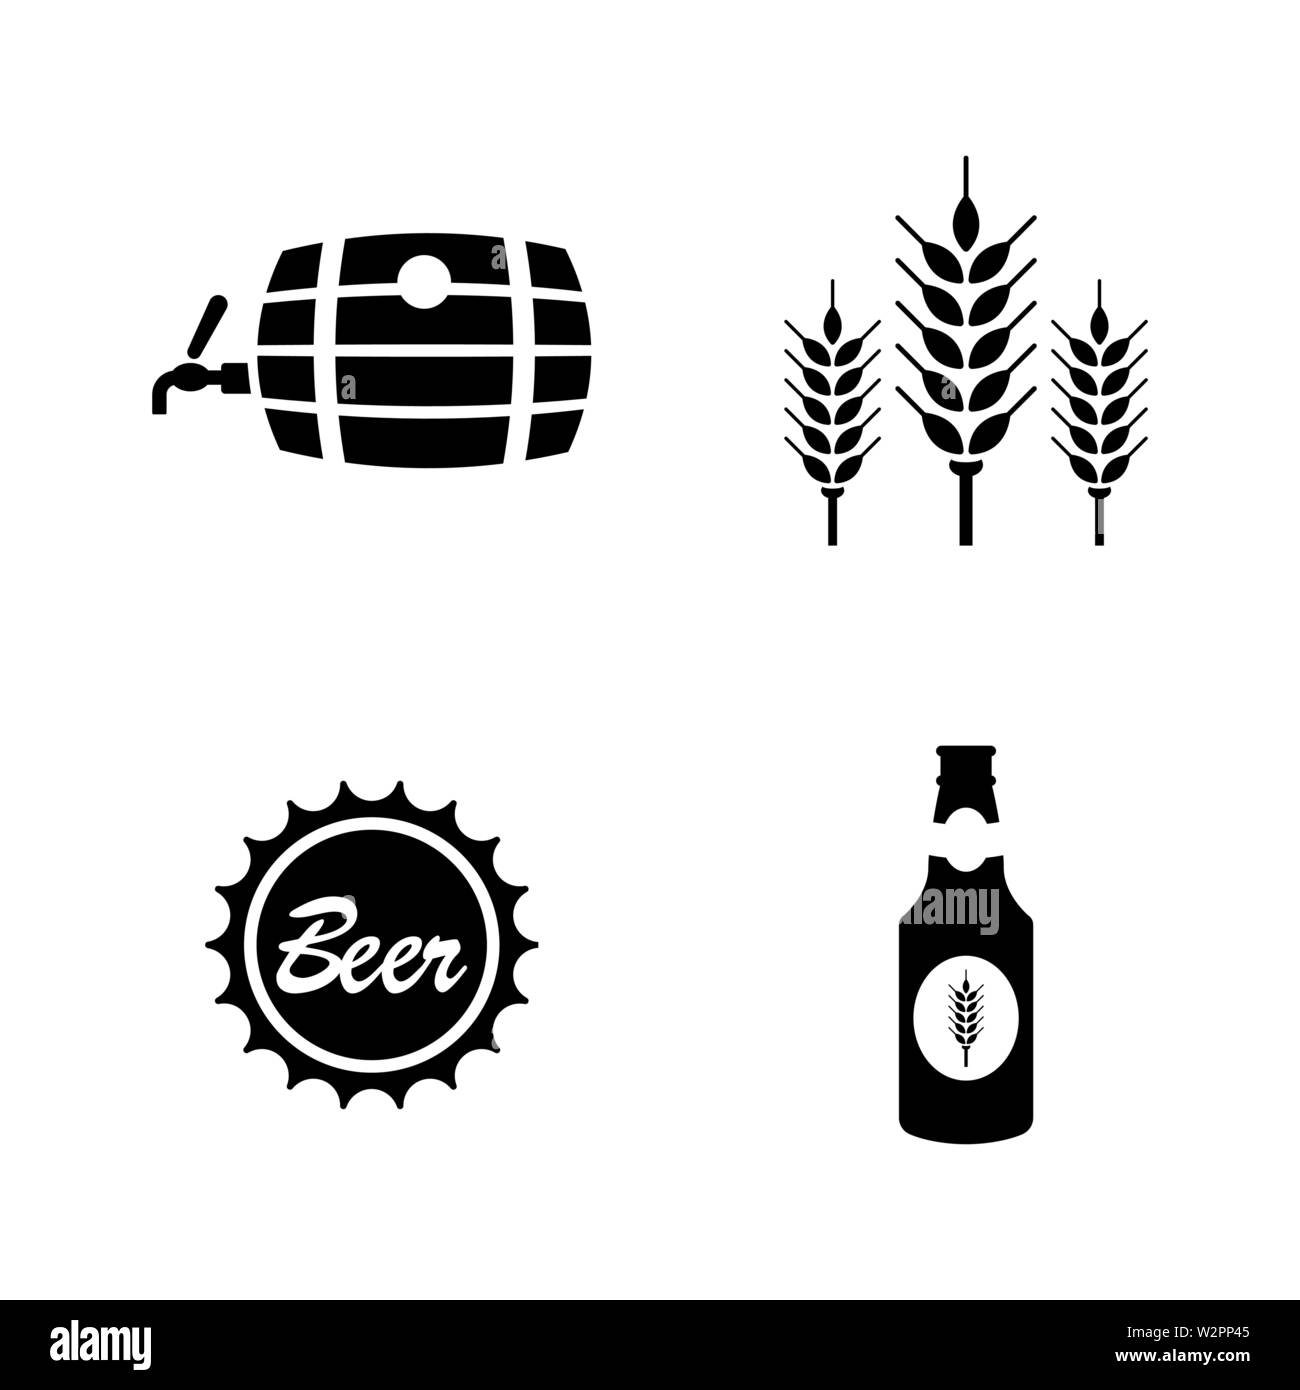 Malt Beer. Simple Related Vector Icons Set for Video, Mobile Apps, Web Sites, Print Projects and Your Design. Black Flat Illustration on White Backgro Stock Vector